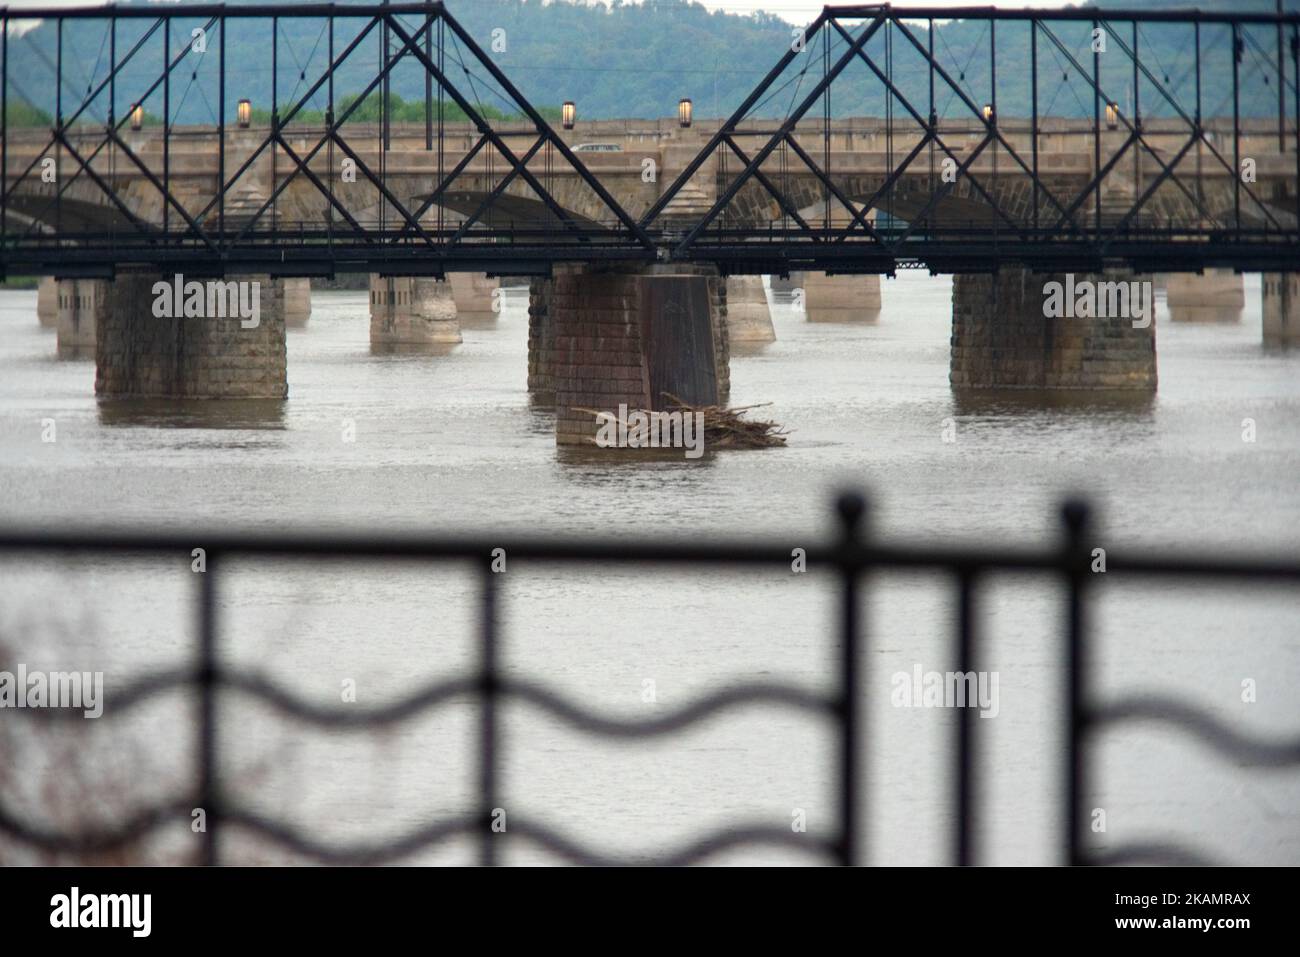 Bridges over the Susquehanna River, in Harrisburg, PA, on the morning of April 30, 2017. Diminishing retail, crumbling infrastructure, environmental issues, poverty and unemployment are shown in a view on the current state of a section of rural America on day 101 of Trump's Presidency. The Keystone state Pennsylvania formed an important factor in Trump's victory in the 2016 US elections. (Photo by Bastiaan Slabbers/NurPhoto) *** Please Use Credit from Credit Field *** Stock Photo